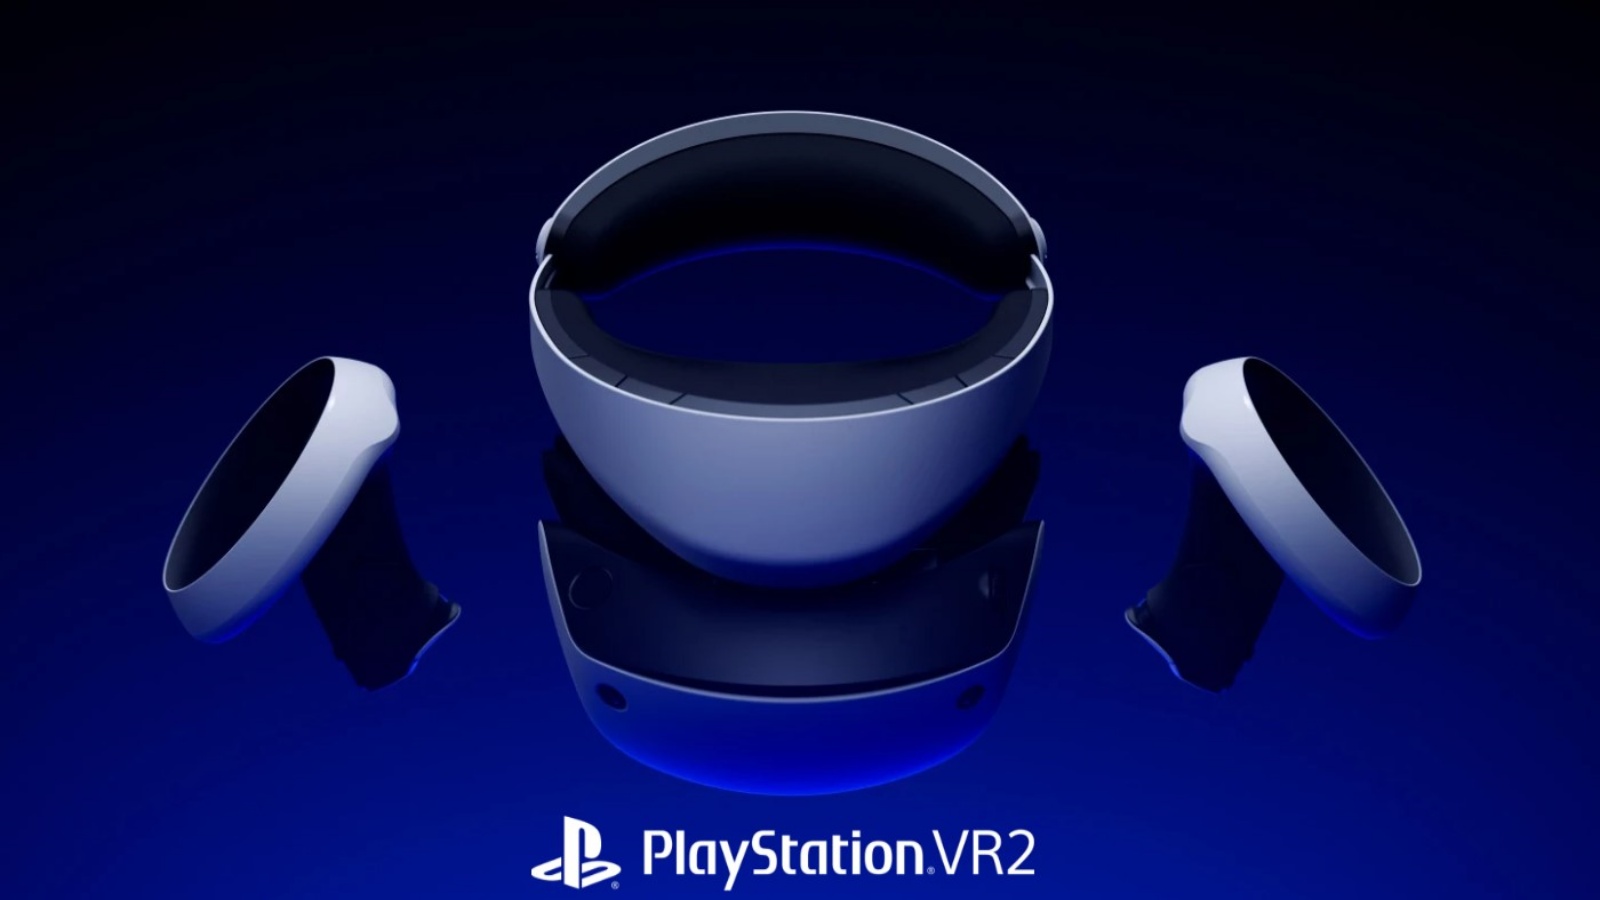 Sony PlayStation VR2 headset now available in India: price, features